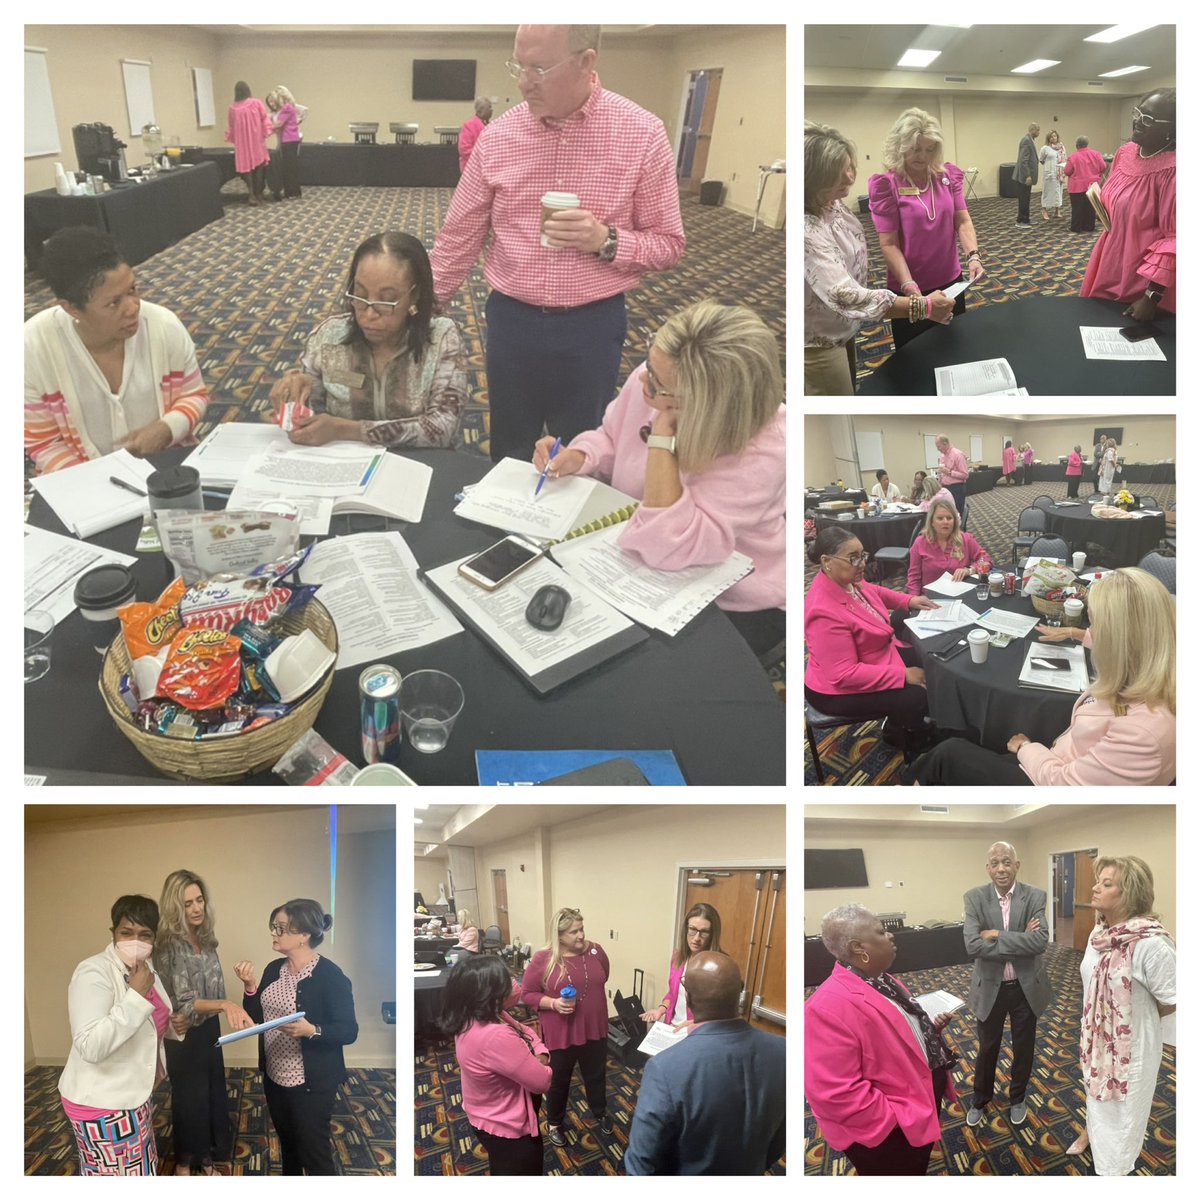 Our @GaDOESDI School and District Improvement Team are life-long learners!  Thank you team for being excellent participants in today’s session.  I enjoyed every minute of our time together. #ImprovingSchools